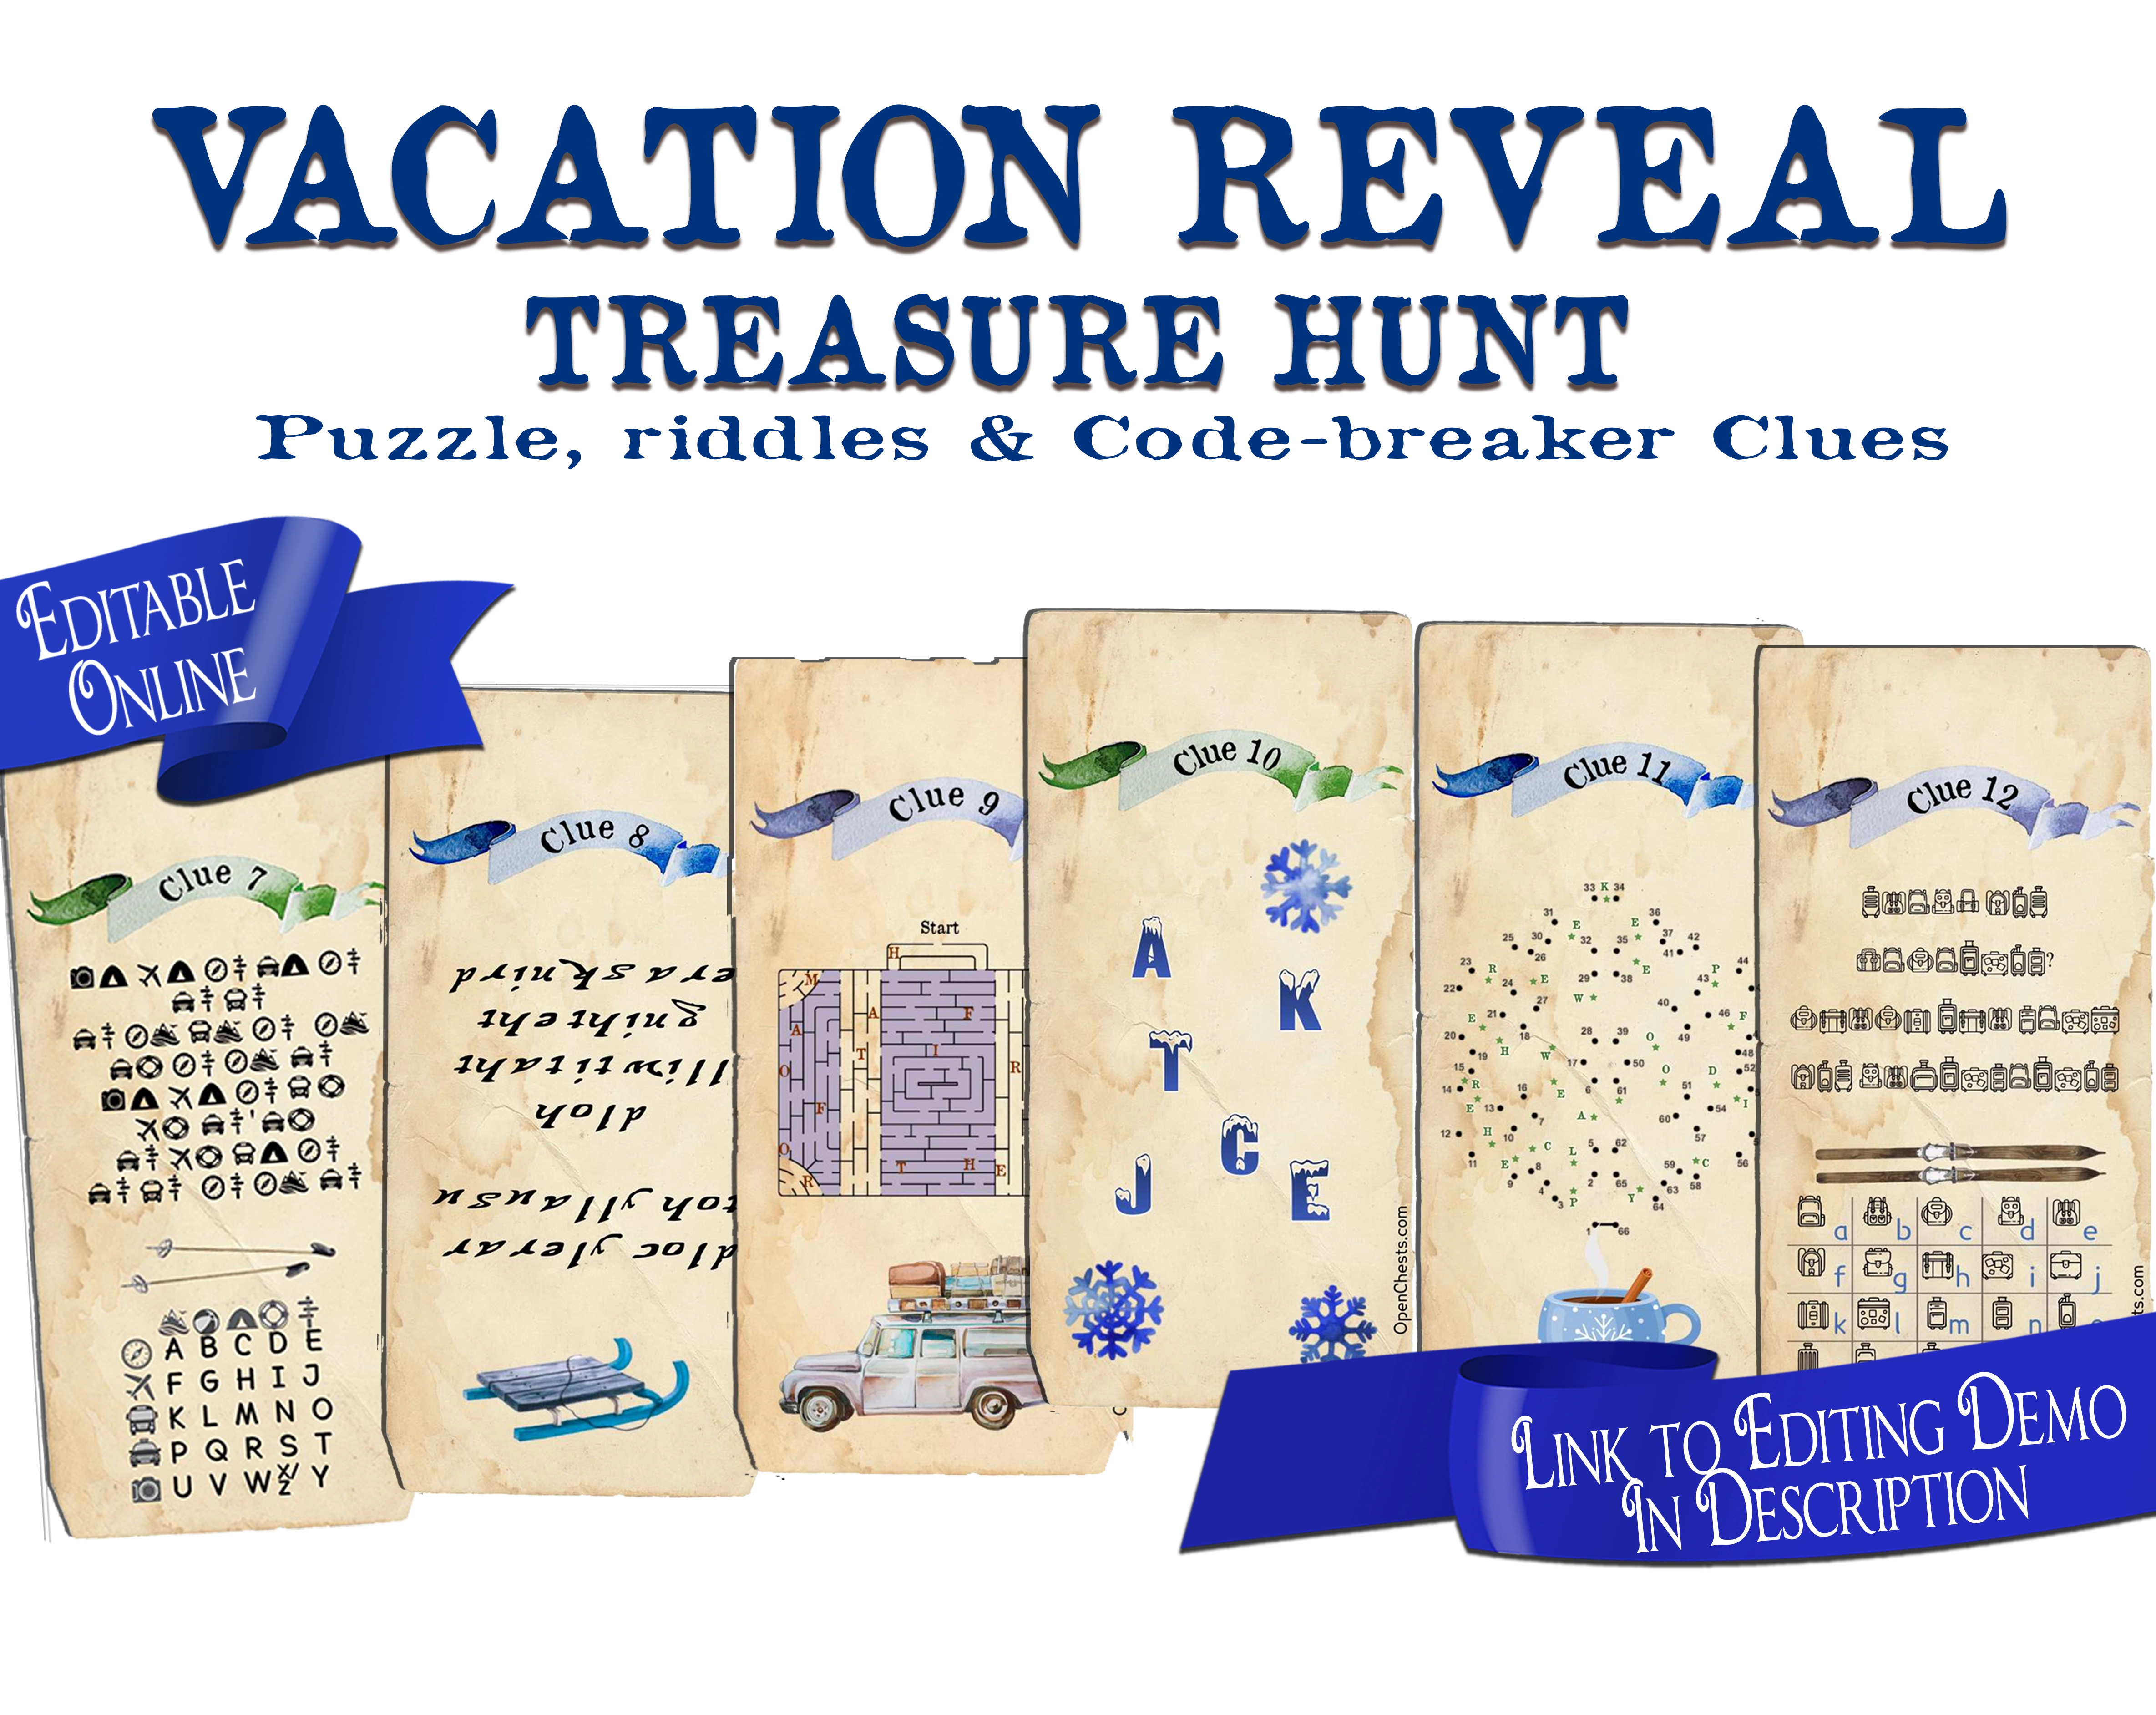 Surprise Vacation Treasure Hunt Clues - Winter Reveal - Open Chests